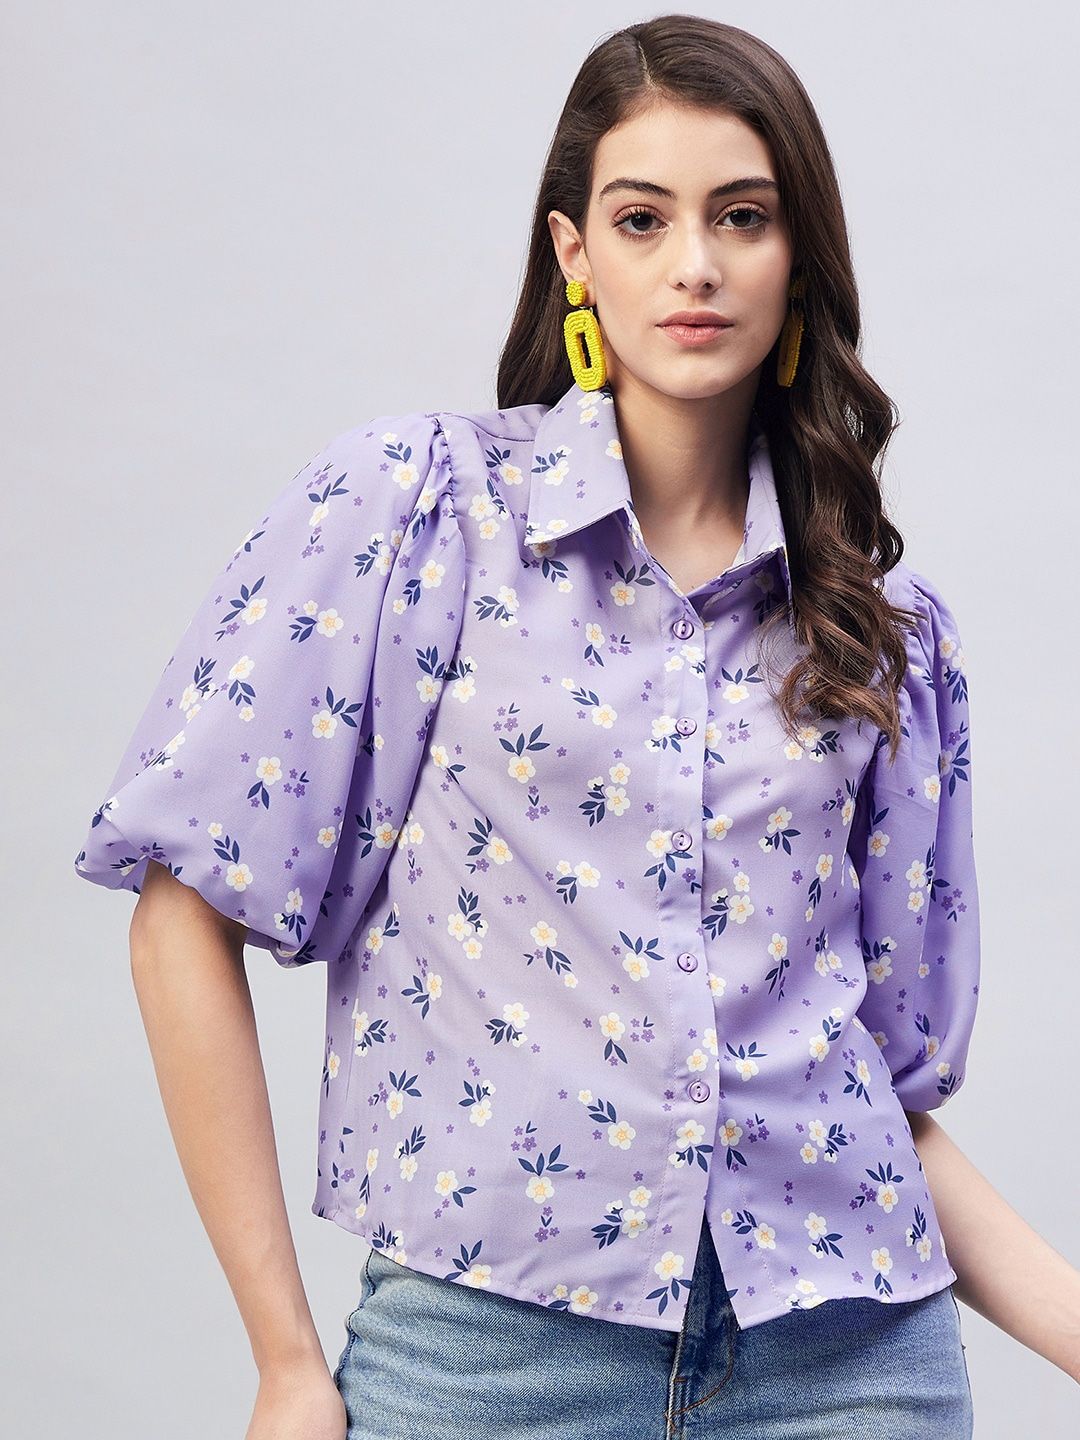 Marie Claire Floral Print Crepe Shirt Style Top Price in India